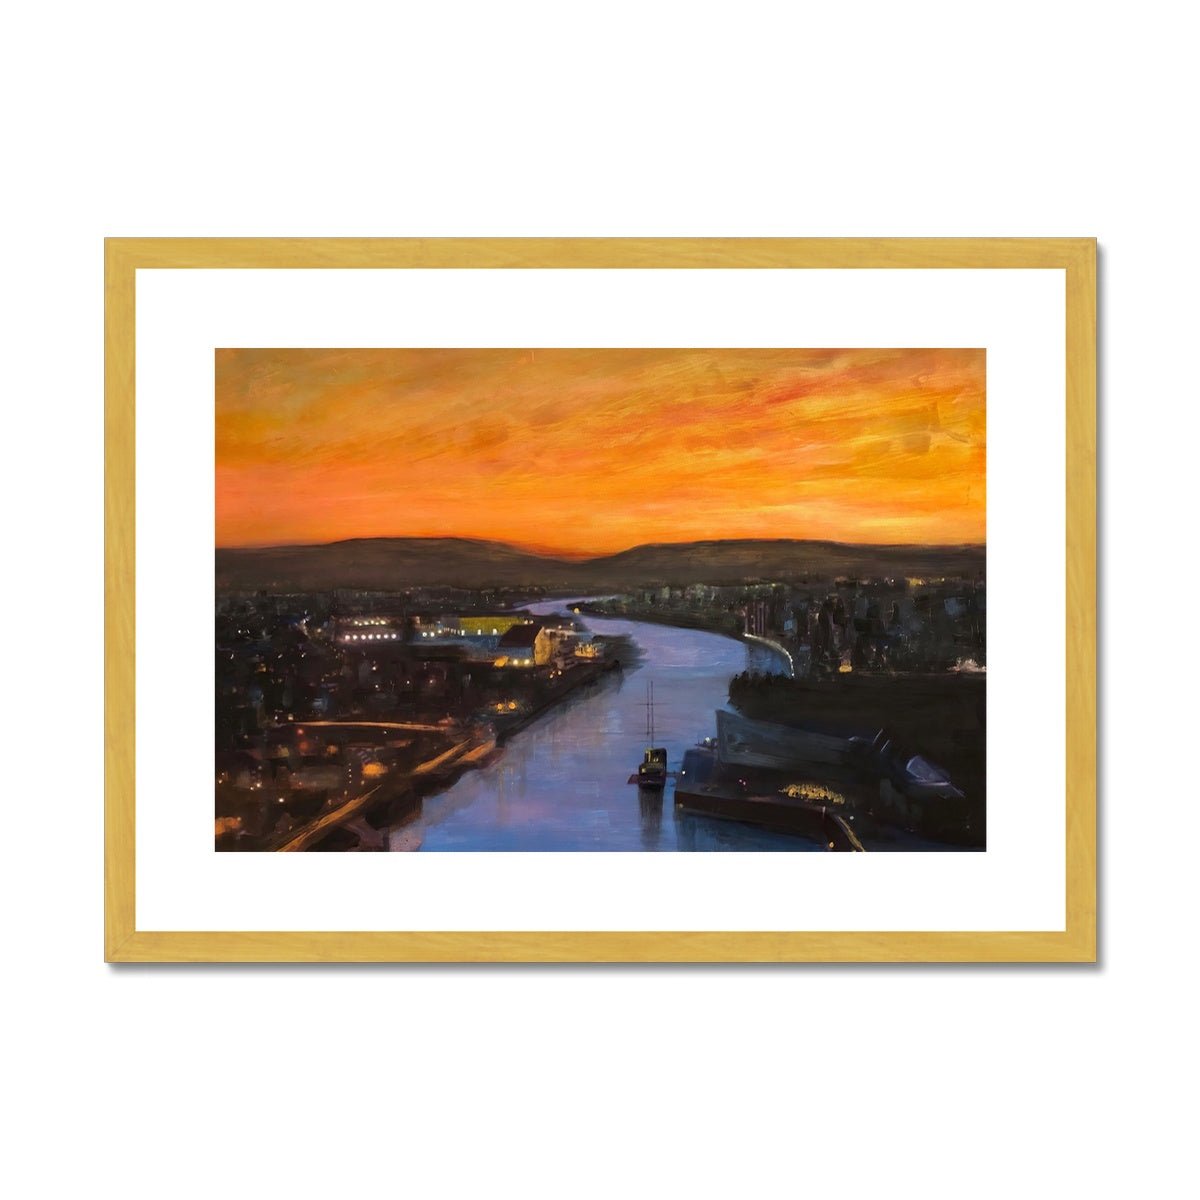 Glasgow Harbour Looking West Painting | Antique Framed & Mounted Prints From Scotland-Antique Framed & Mounted Prints-Edinburgh & Glasgow Art Gallery-A2 Landscape-Gold Frame-Paintings, Prints, Homeware, Art Gifts From Scotland By Scottish Artist Kevin Hunter